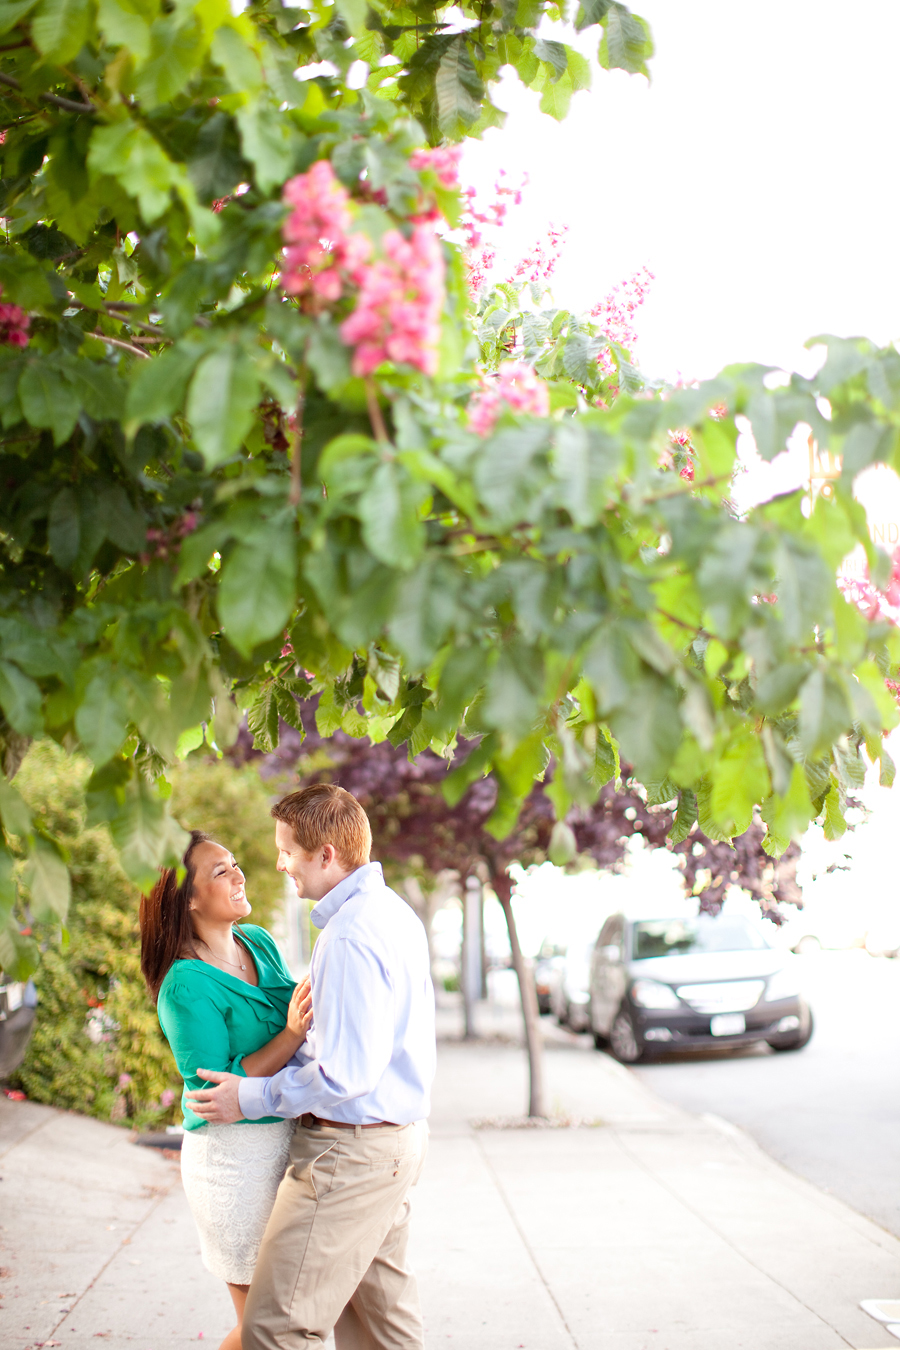 The couple stands on the San Francisco sidewalk under a tree.